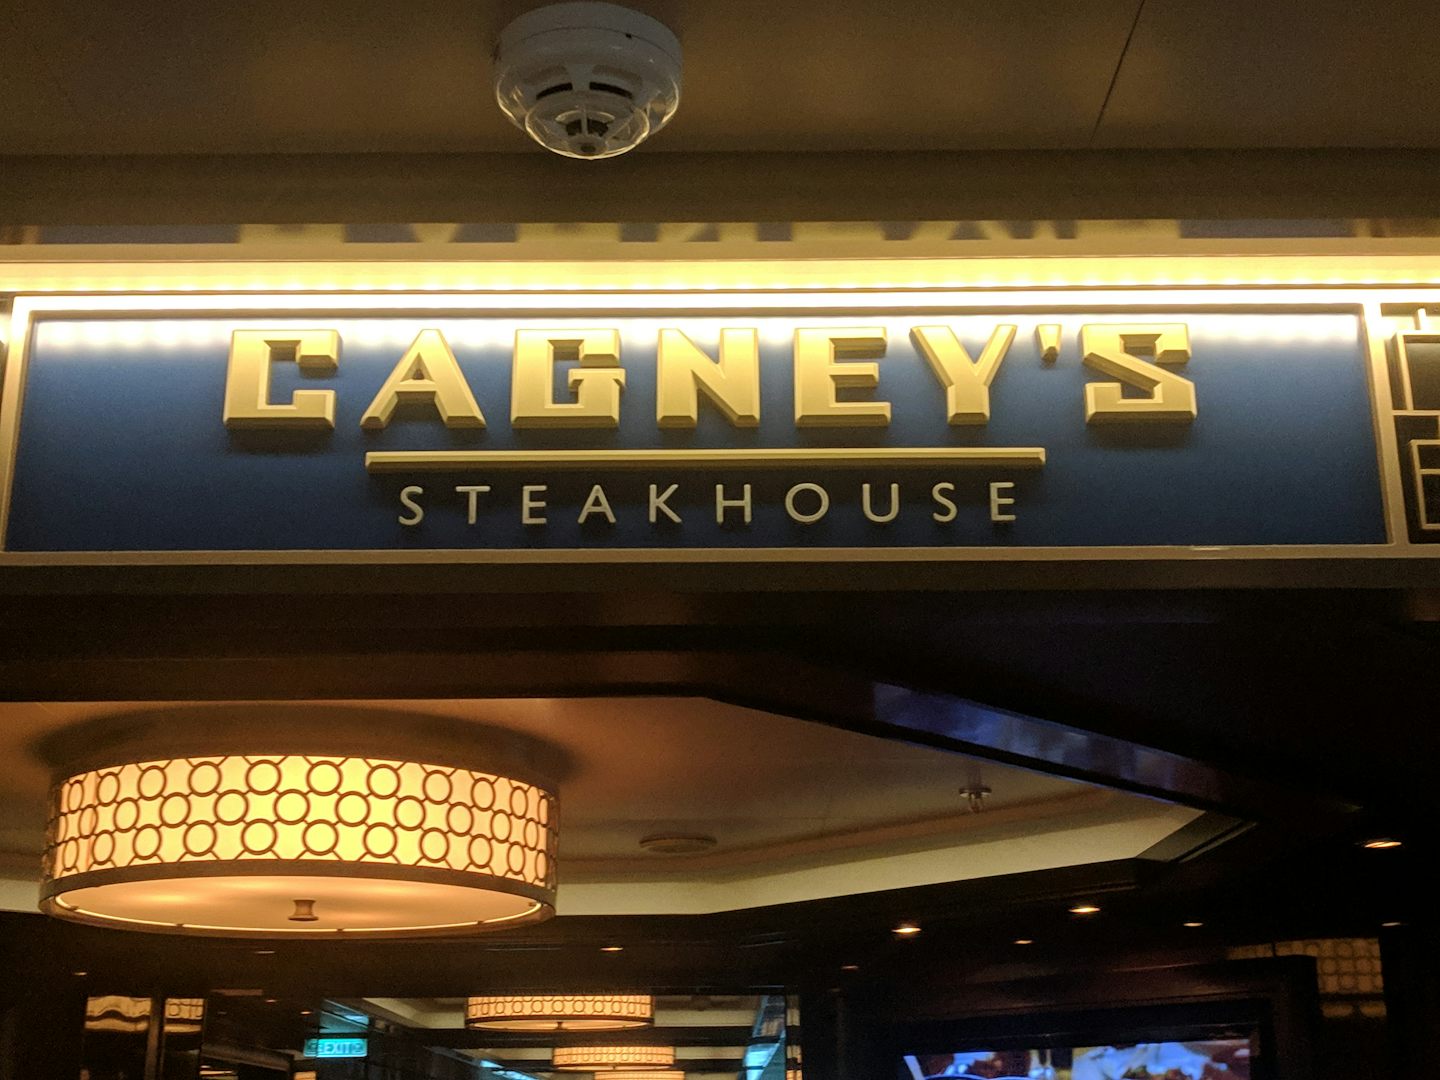 Cagney's steakhouse. Nice selection of food to choose from